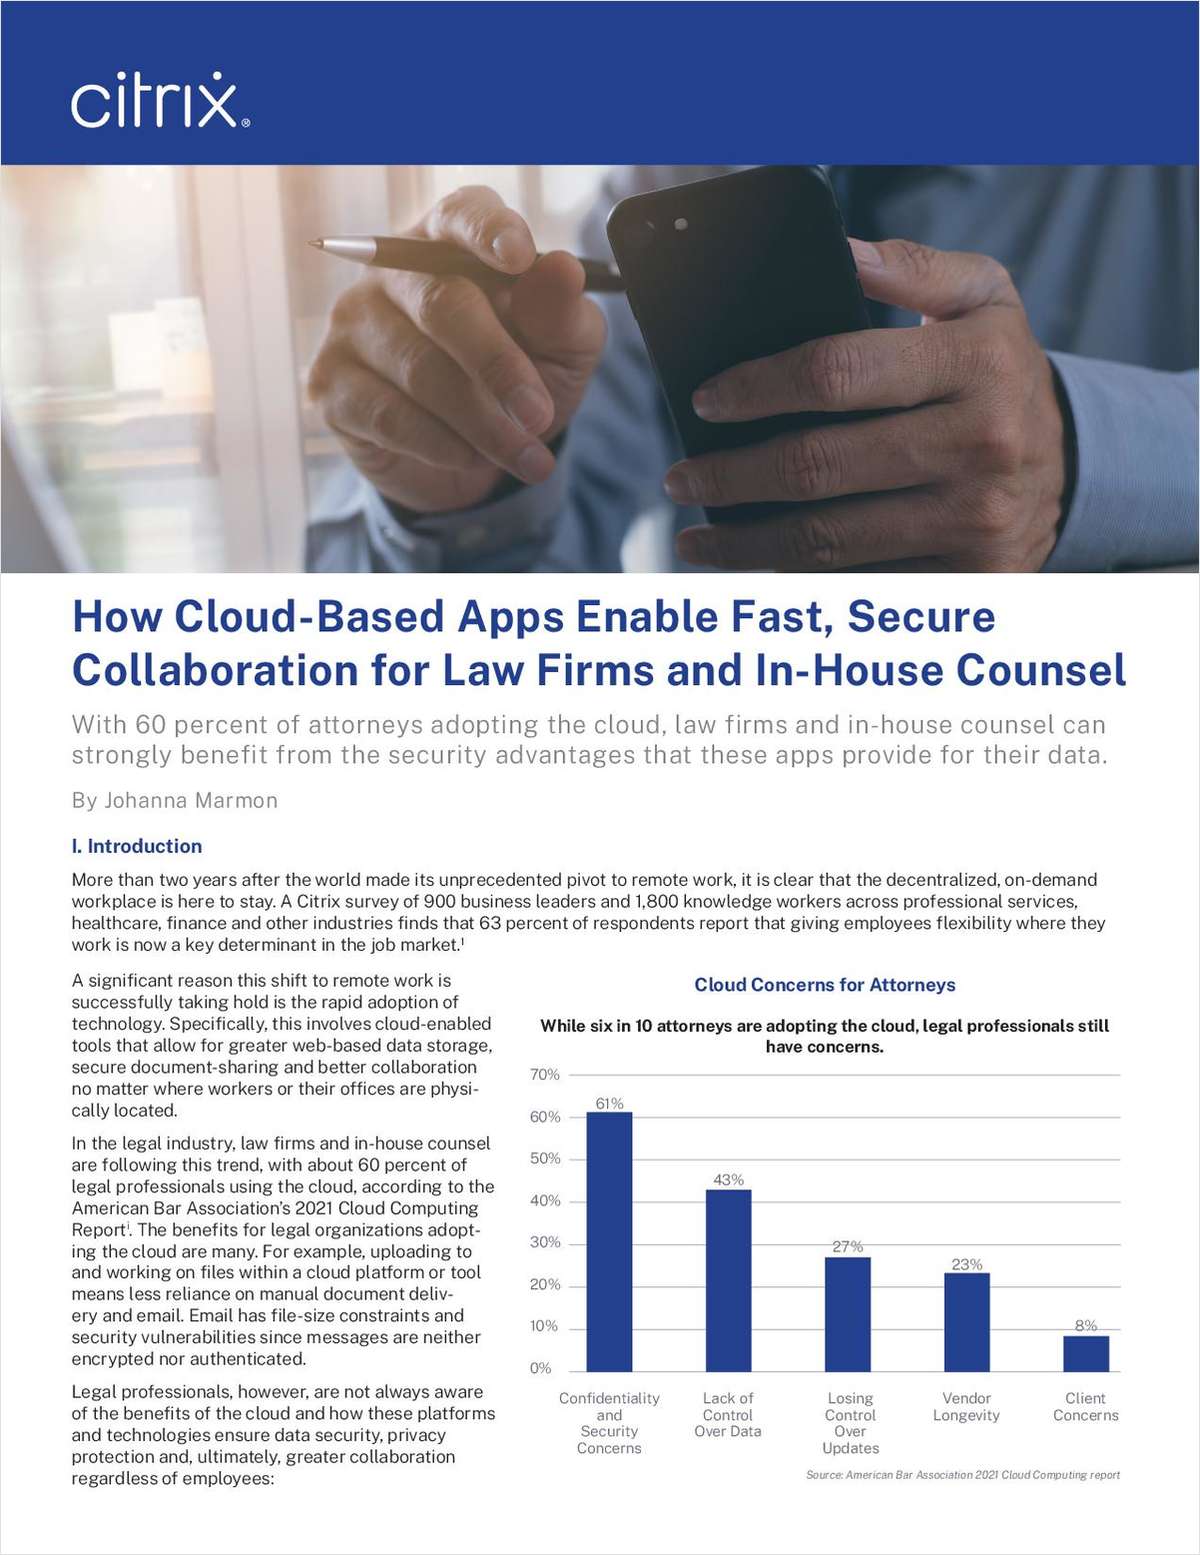 With 60% of attorneys adopting the cloud, legal teams can strongly benefit from the security advantages that cloud-based apps provide for their data. However, many legal professionals still have concerns or may not be aware of how these benefits can positively impact their team. Download this white paper to learn how to create a more efficient and secure workflow.